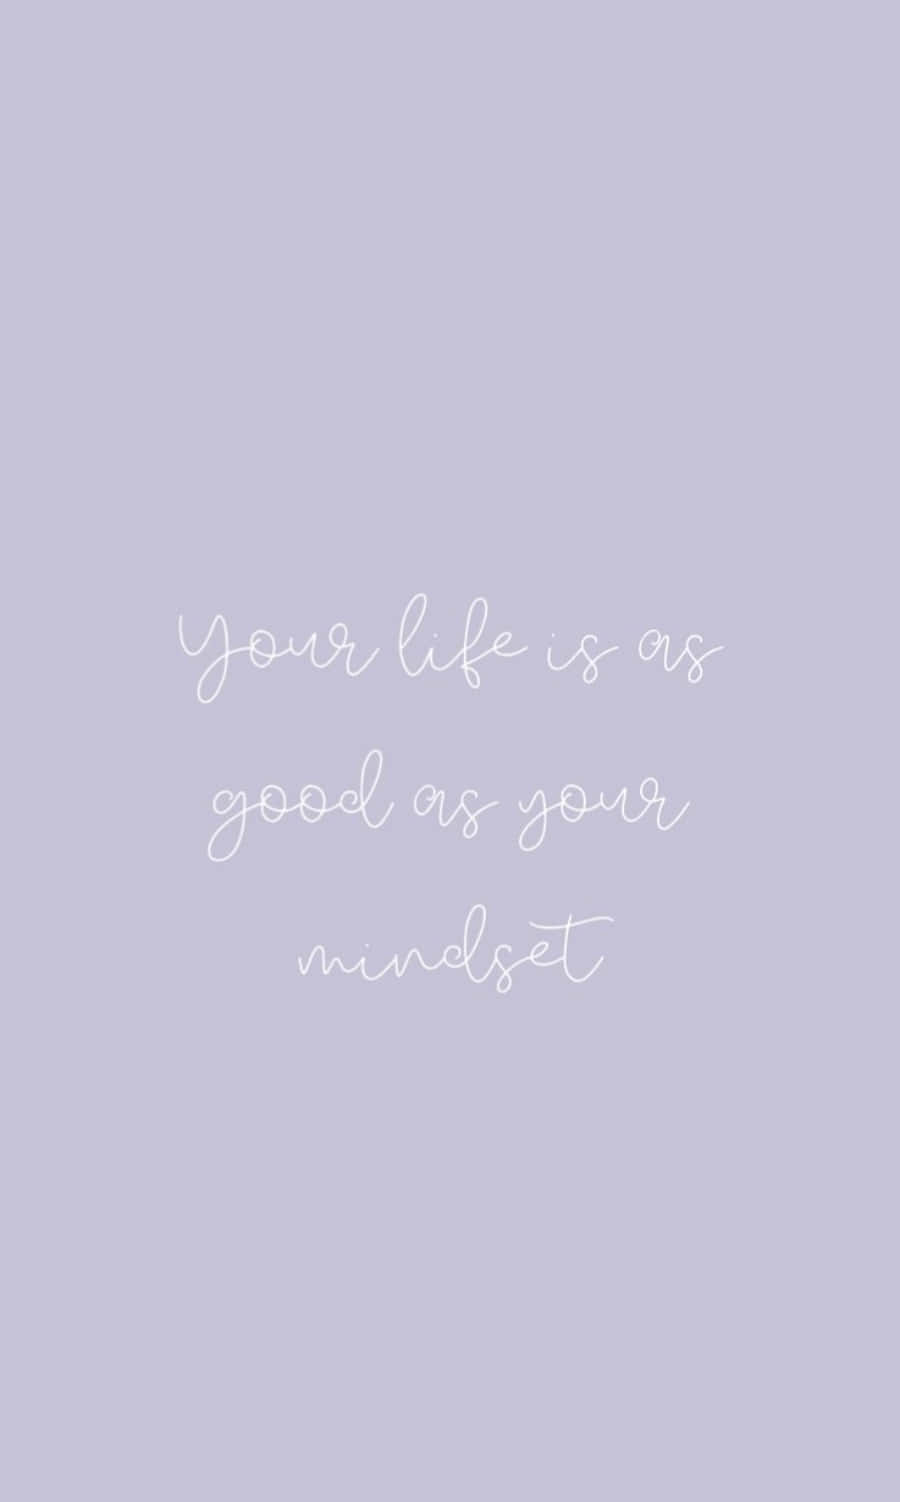 Download Your Life Is As Good As Your Mind | Wallpapers.com